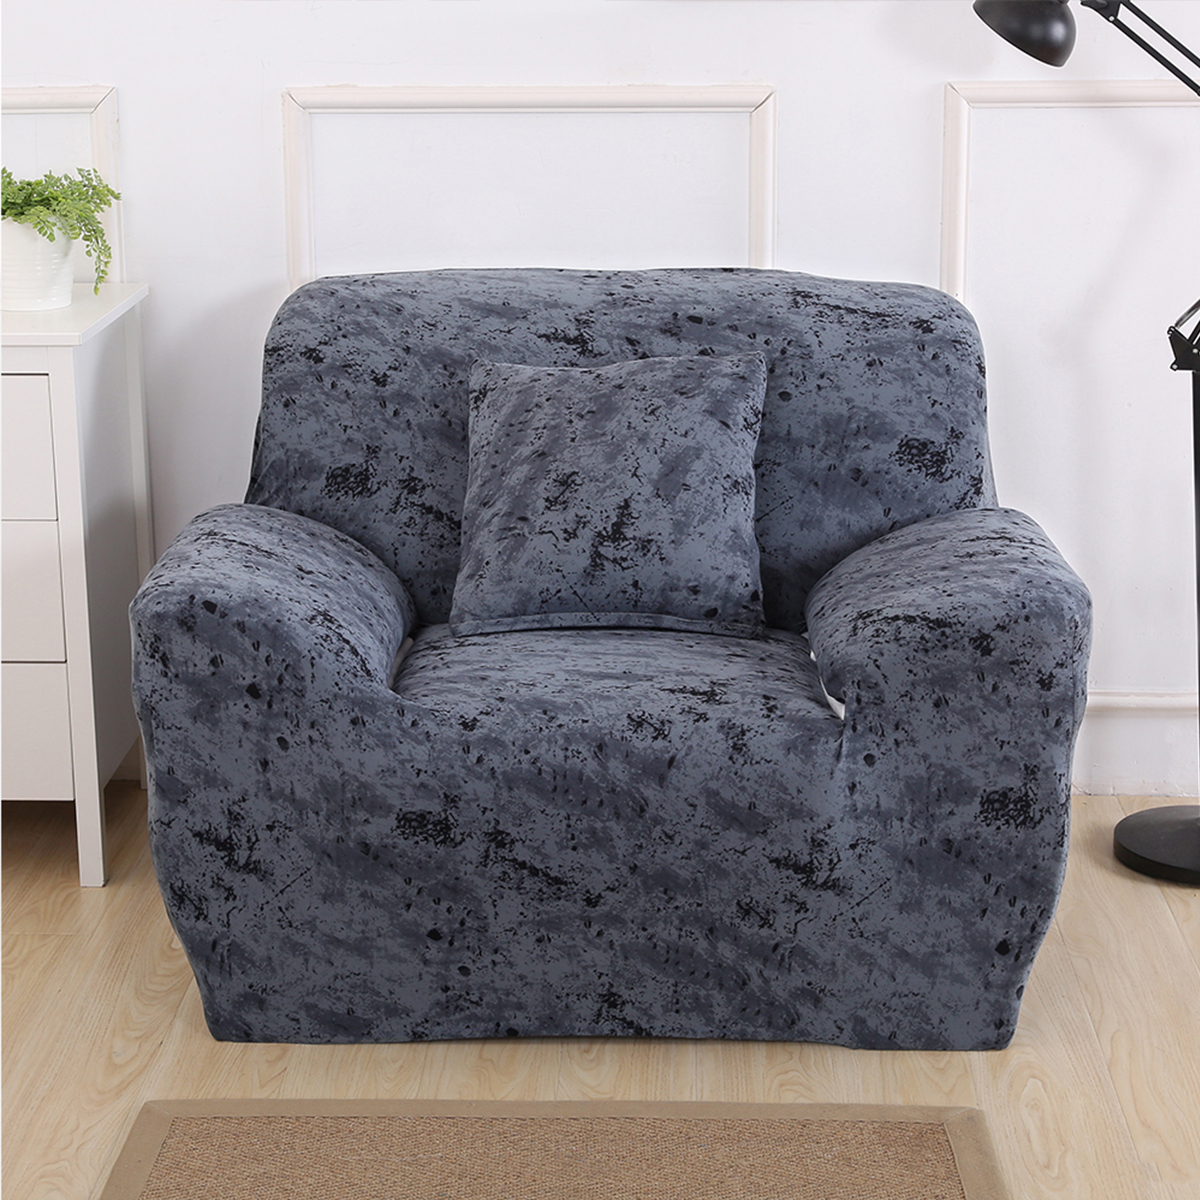 1234-Seater-Universal-Elastic-Stretch-Sofa-Cover-Slipcover-Couch-Washable-Furniture-Protector-1730249-4